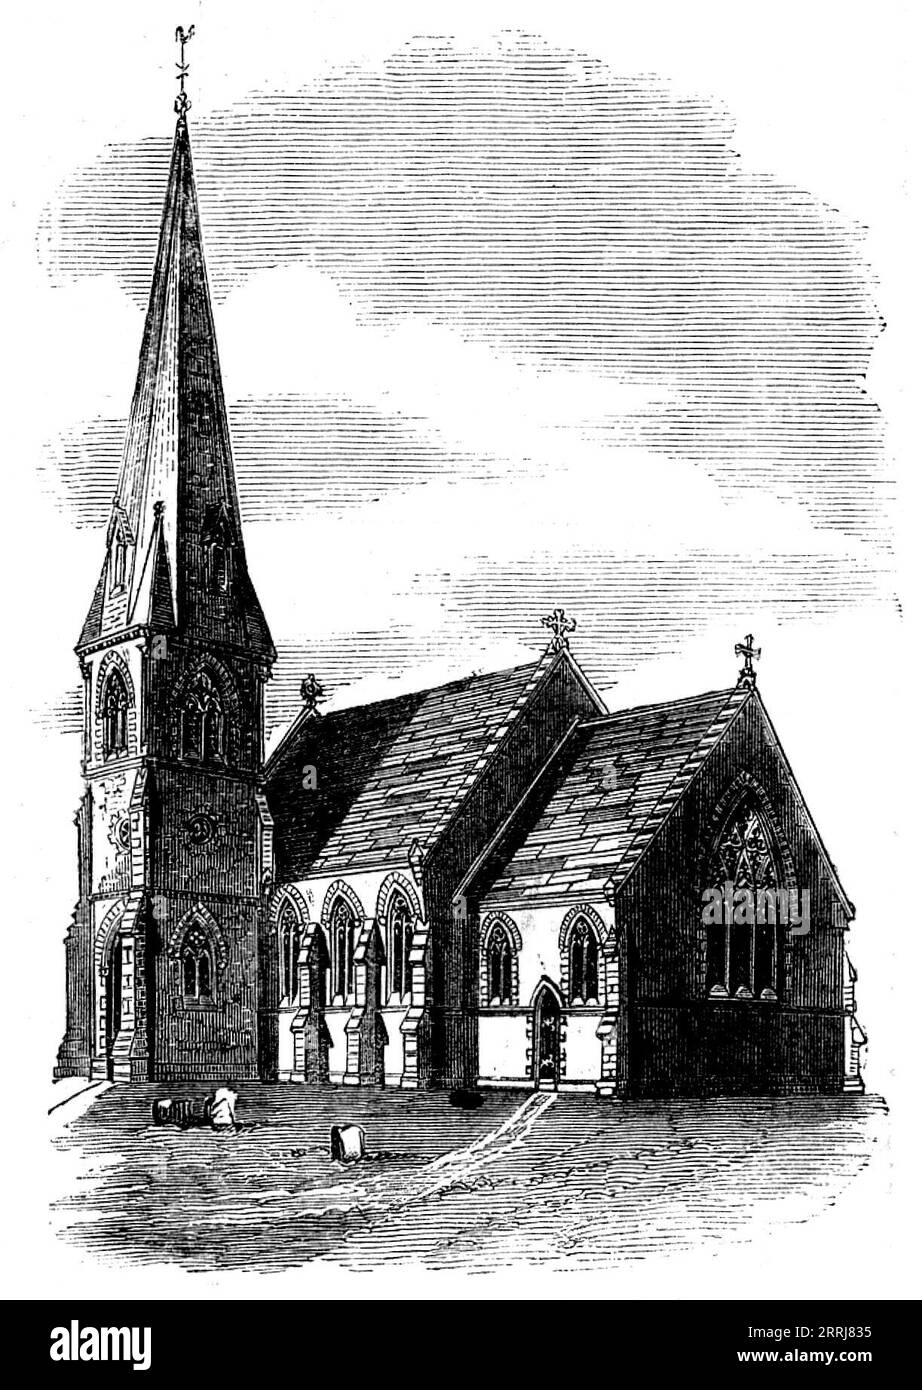 Blackfordby Church, Ashby-de-la-Zouch, 1858. The newly-built St. Margaret's Church at Blackfordby in Leicestershire. 'The church stands upon lofty ground, commanding an extensive prospect of the country from Cannock Chase to Charnwood Forest. The style adopted is Gothic as it prevailed during the fourteenth century...There is accommodation (including 90 children) for 295 persons. The contractor for the execution of the works was Mr. Edwin Cooper, of Ashby-de-la-Zouch... Stone found near the site has been used for the greater part of the work; Ancaster stone being used for the windows and copin Stock Photo